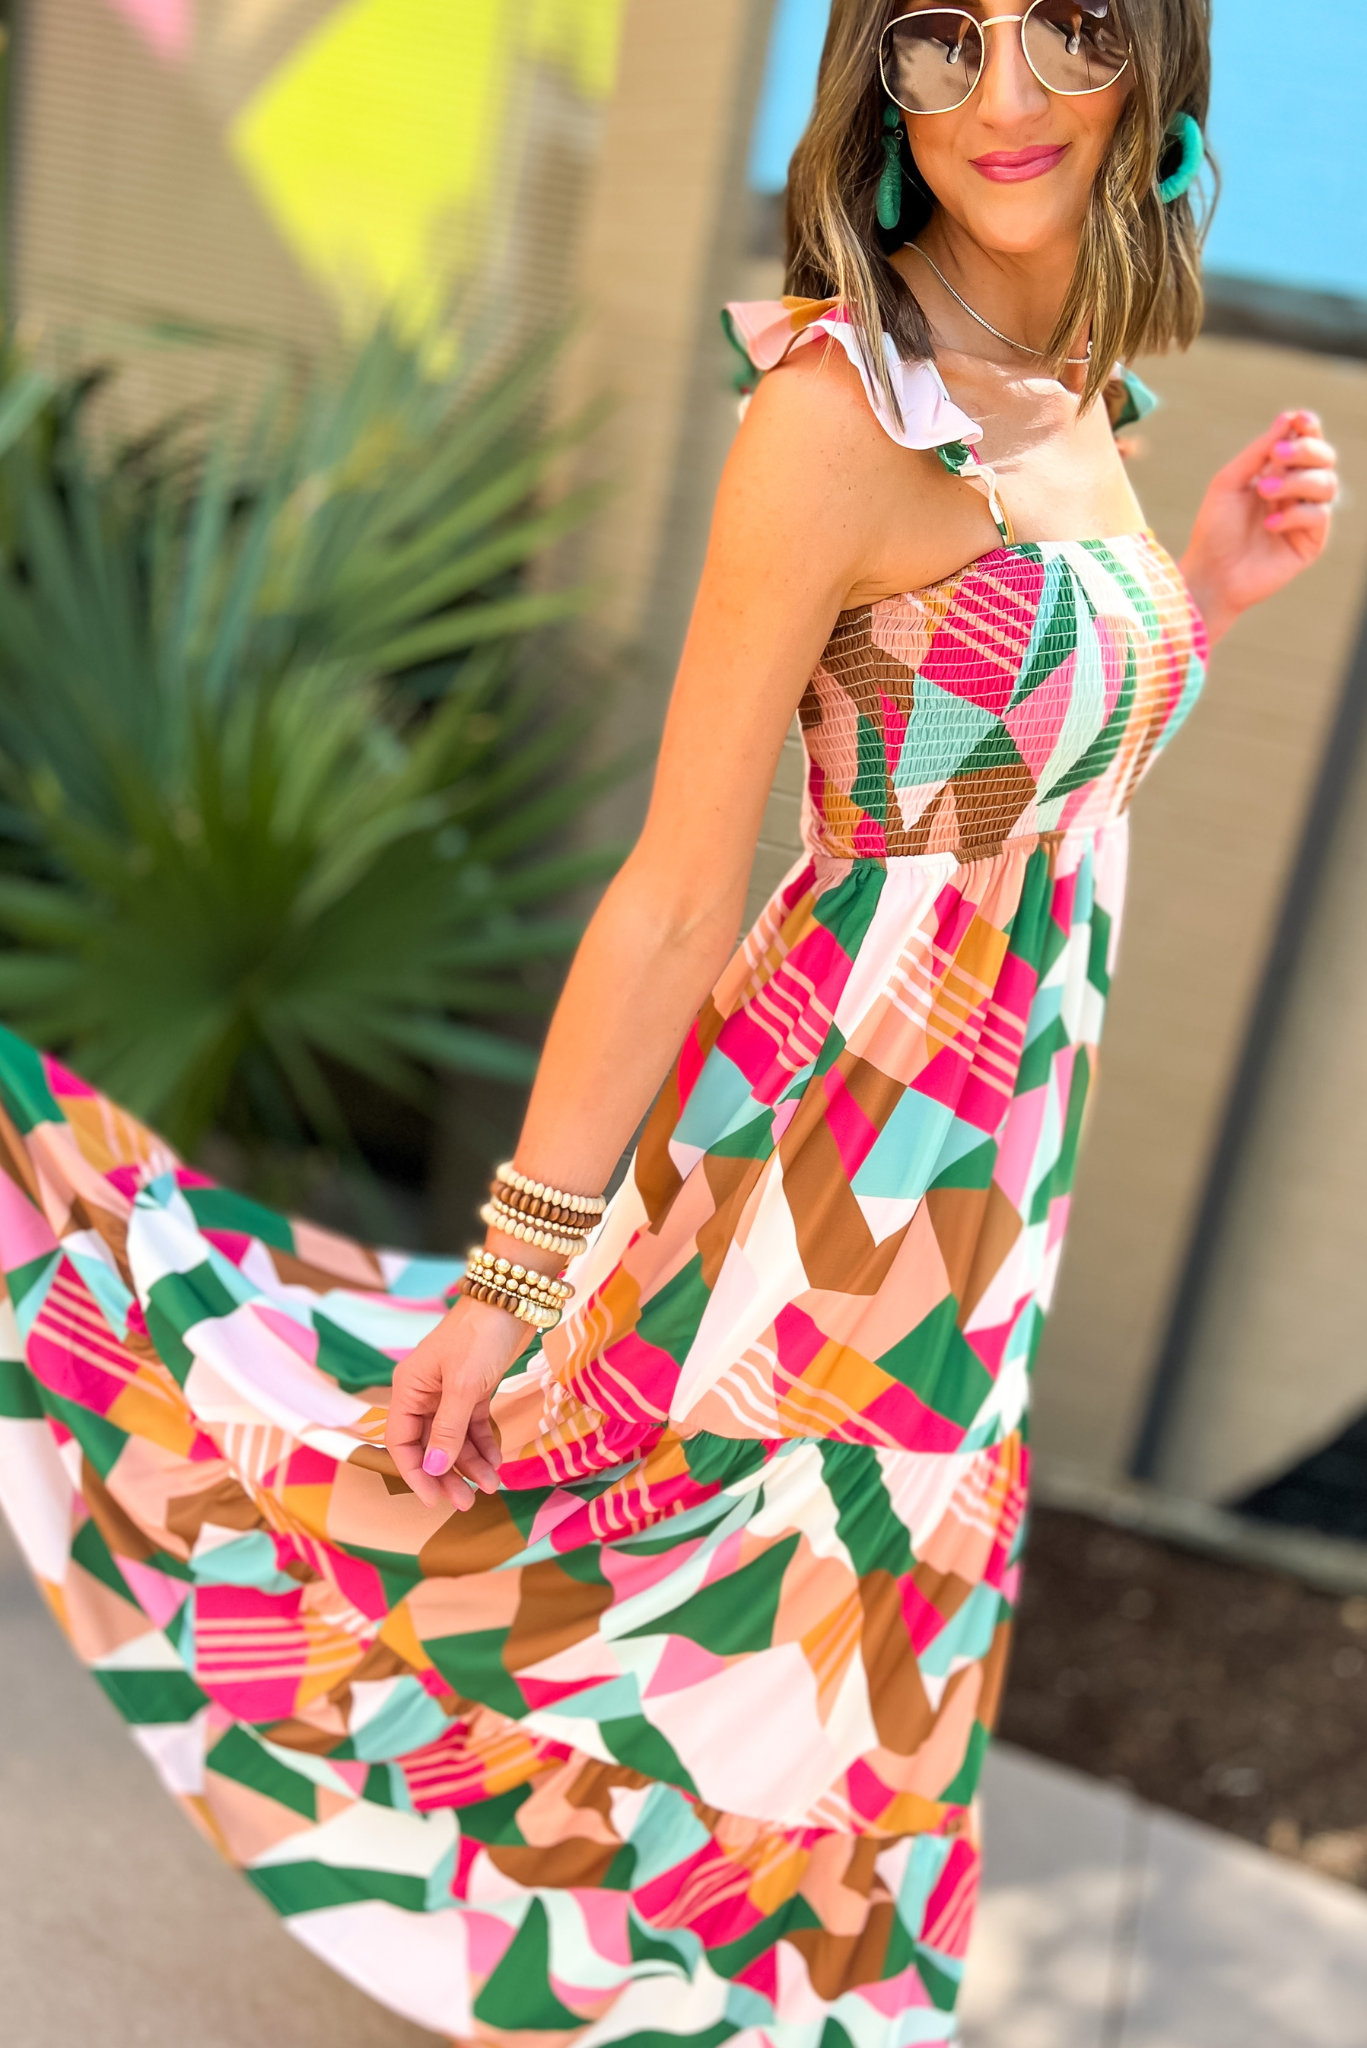 SSYS Exclusive Abstract Print Smocked Flutter Shoulder Maxi Dress, maxi dress, abstract print, smocked, flutter shoulder, summer dress, shop style your senses by mallory fitzsimmons